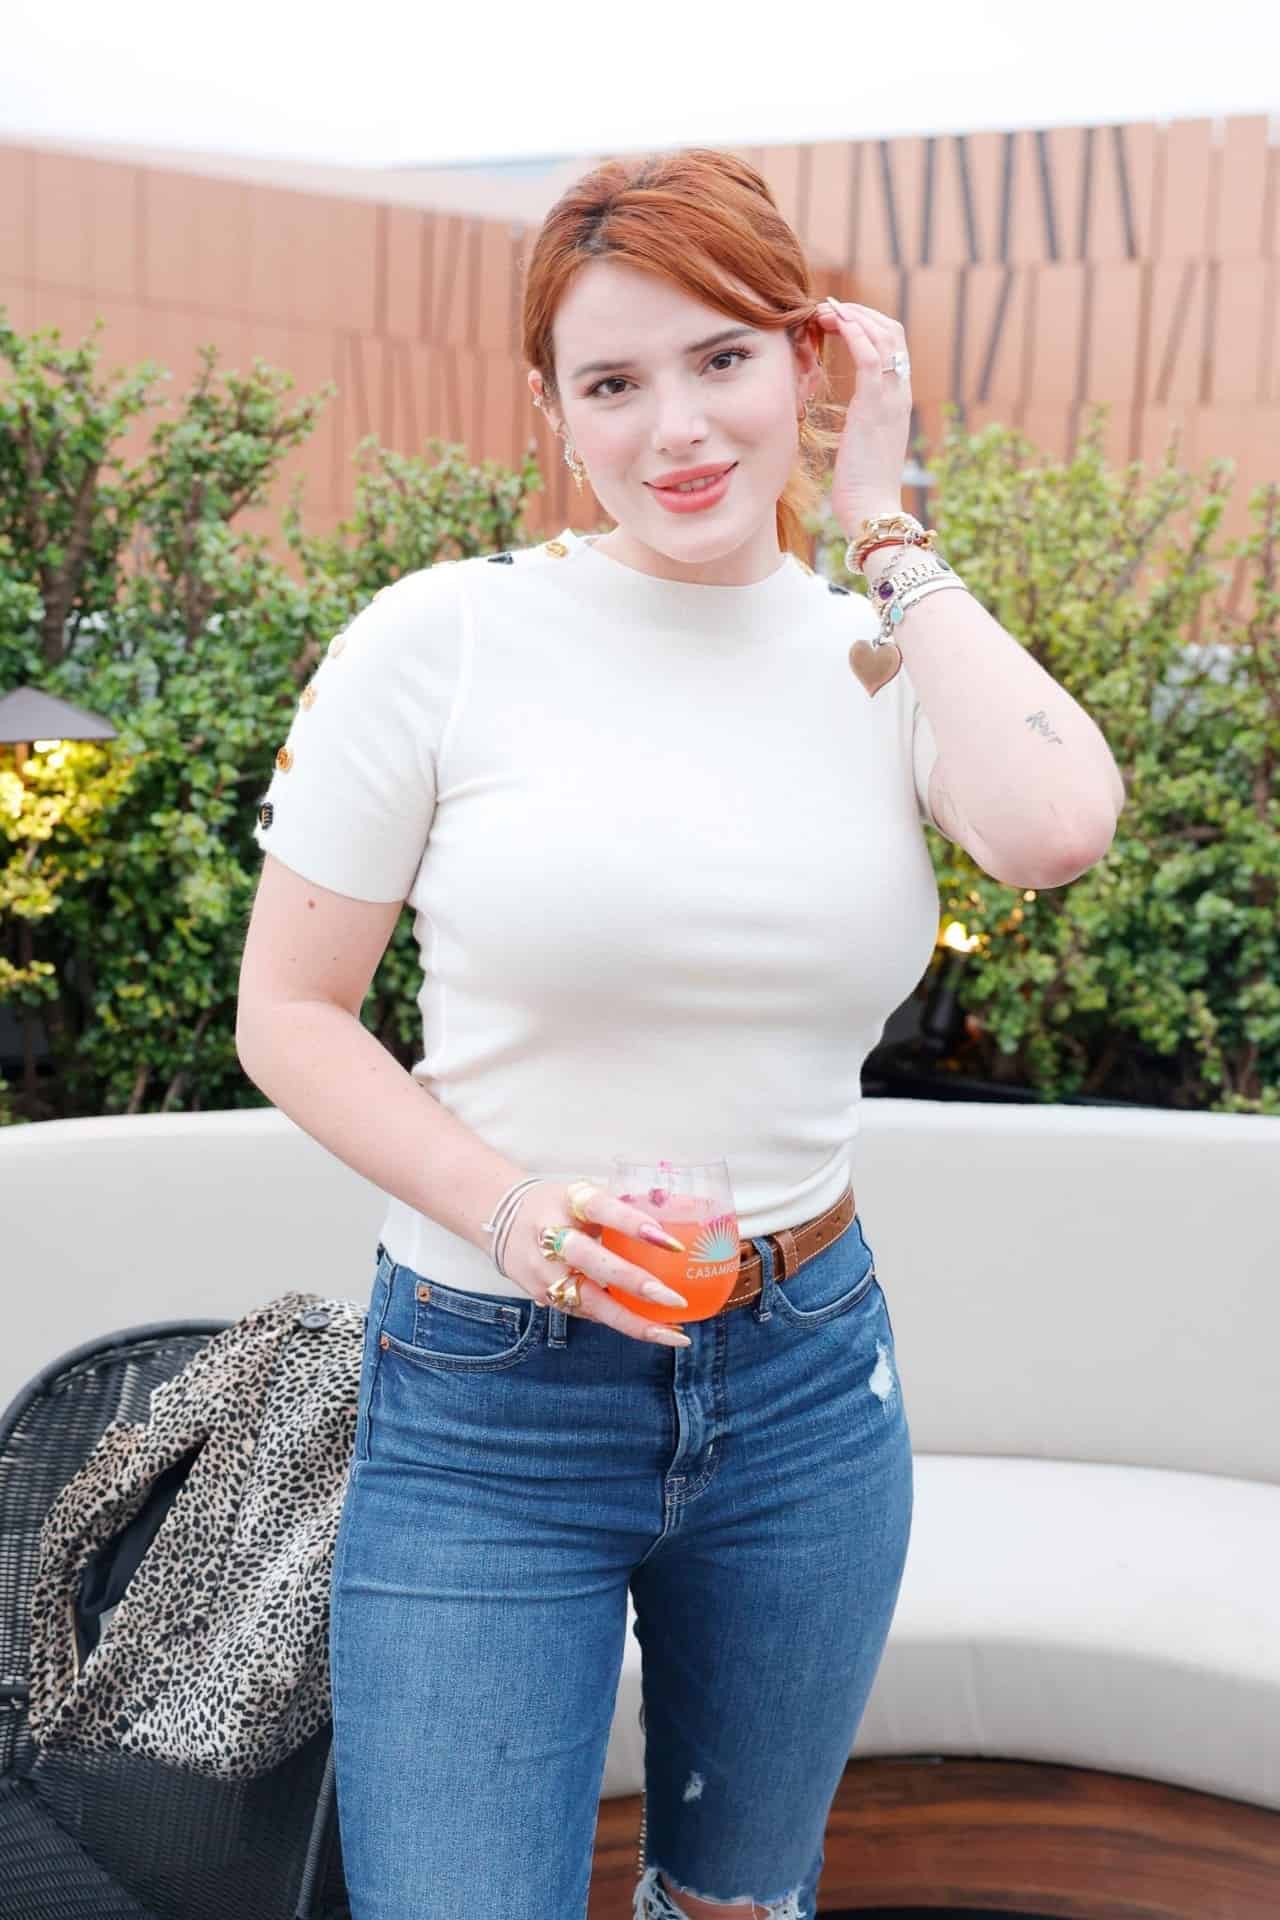 Bella Thorne in Classic Chic Attire at the Fluid App Launch Party